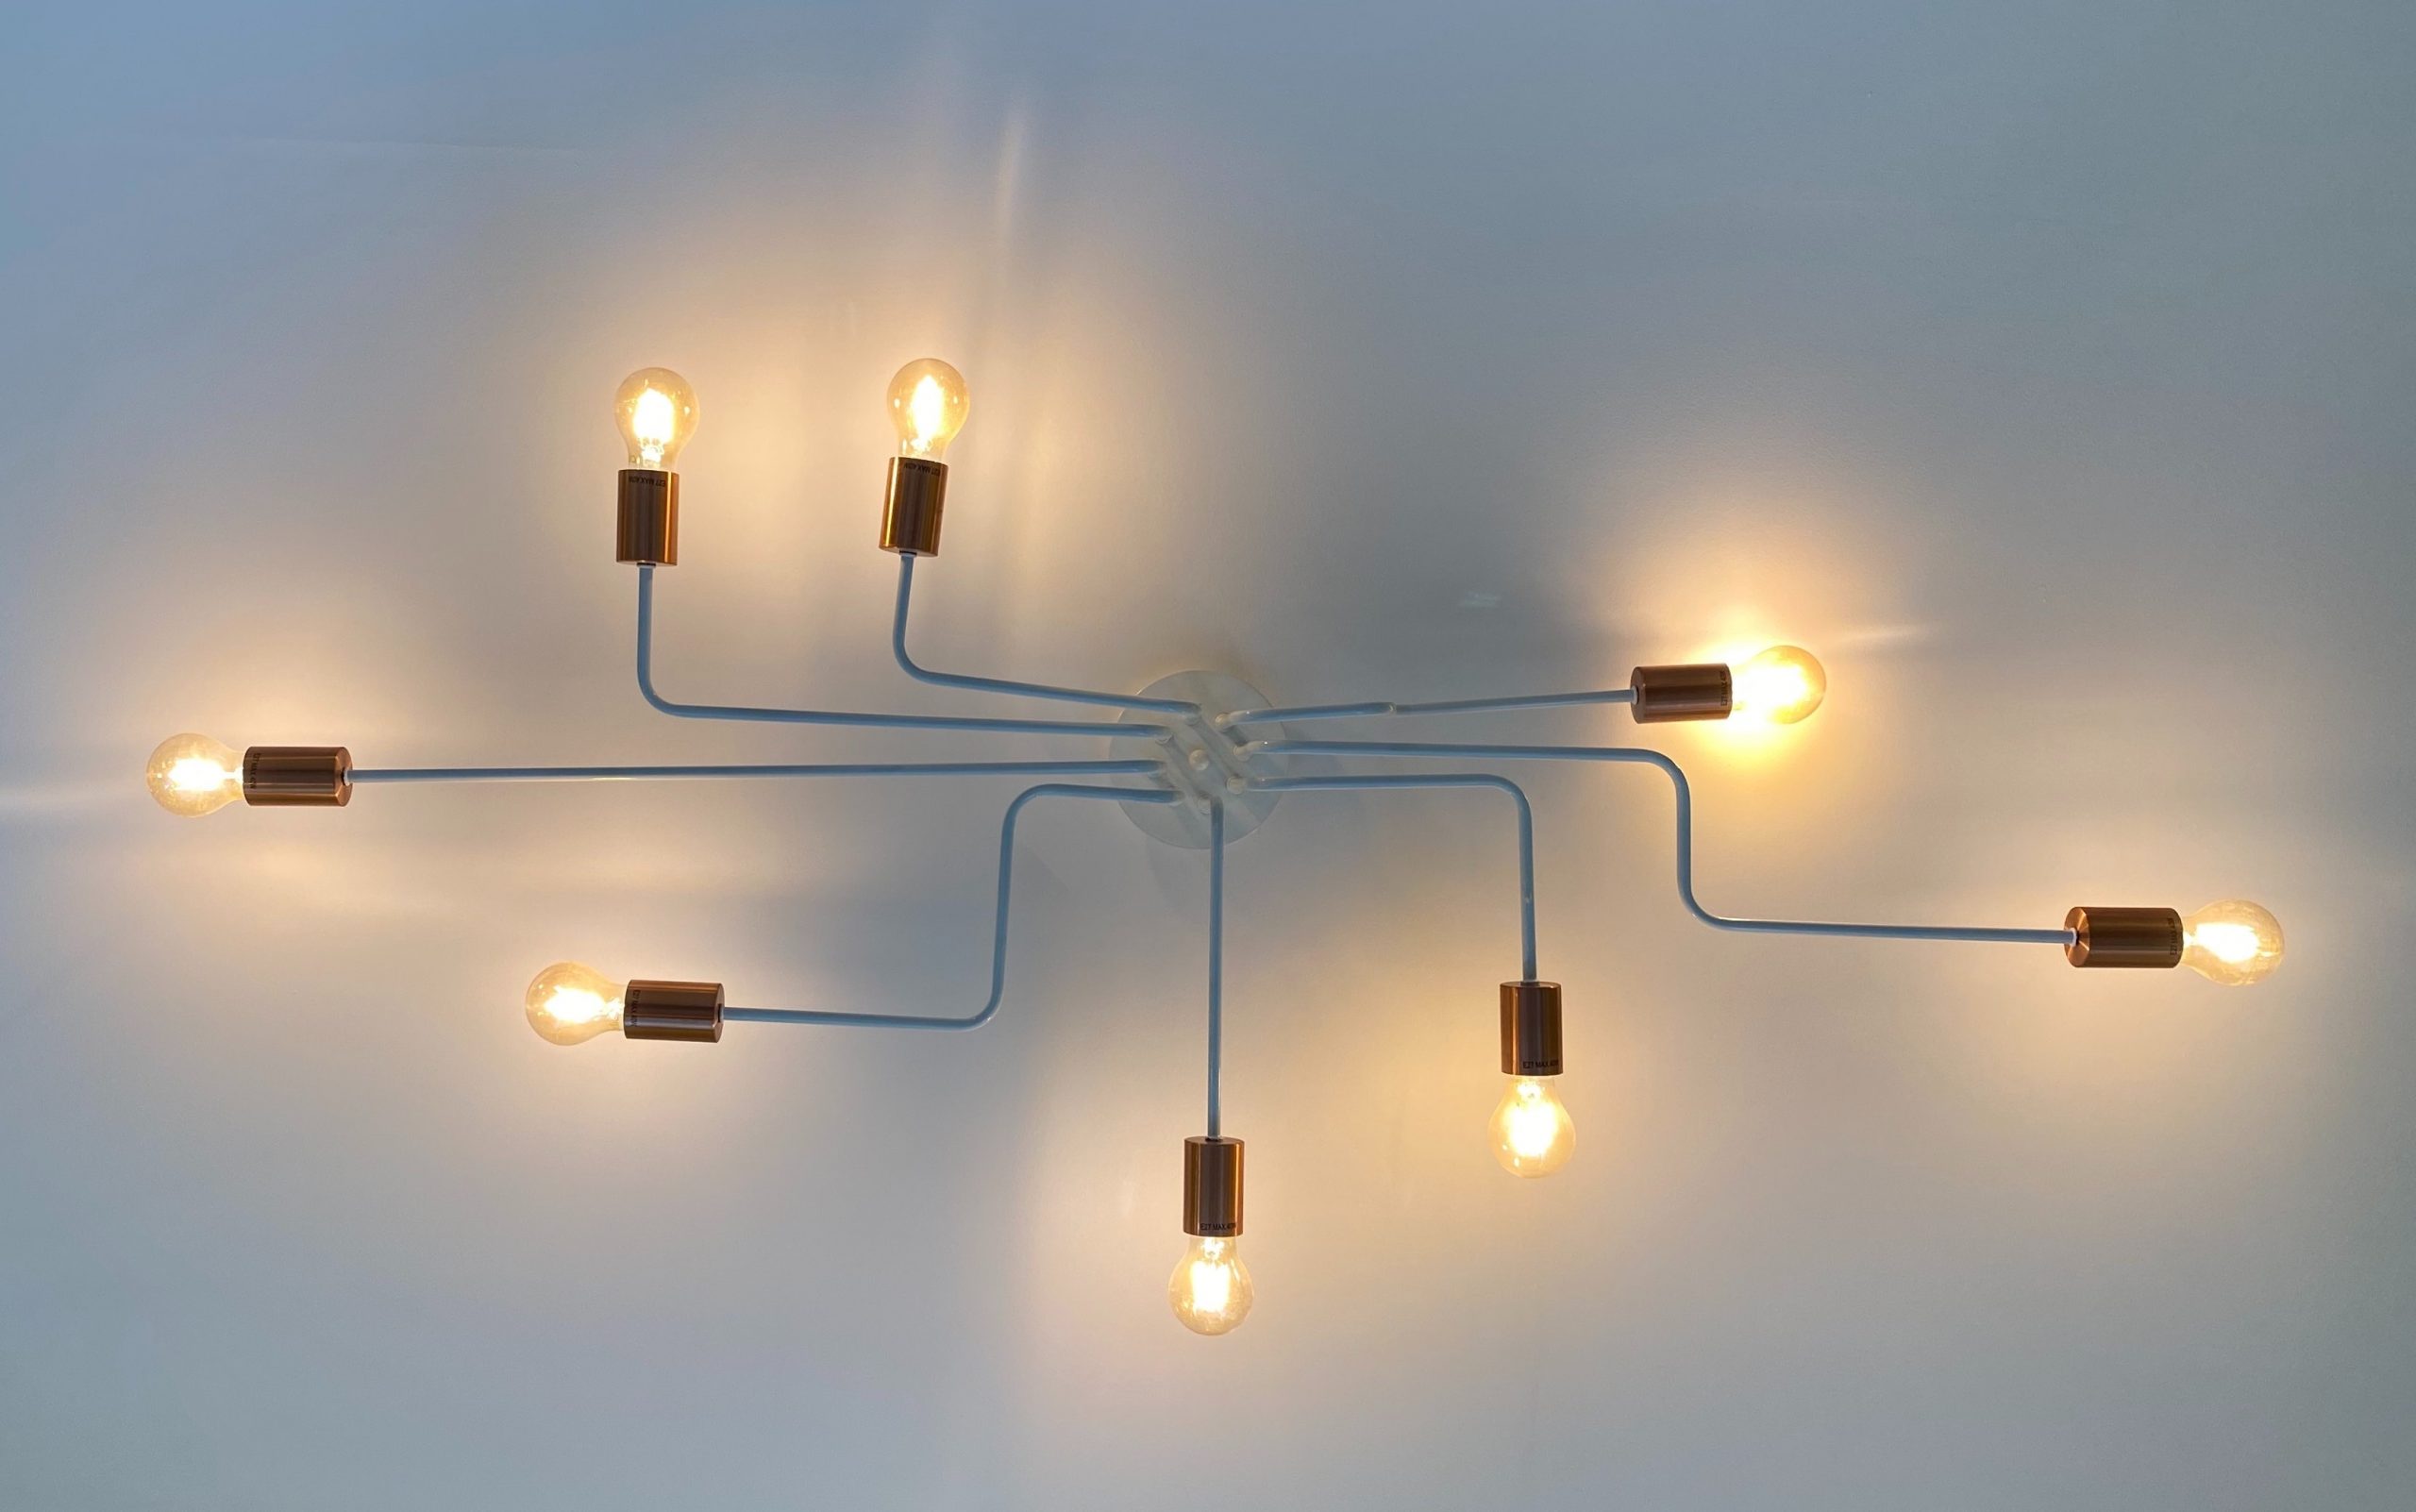 Image of several lightbulbs connected together